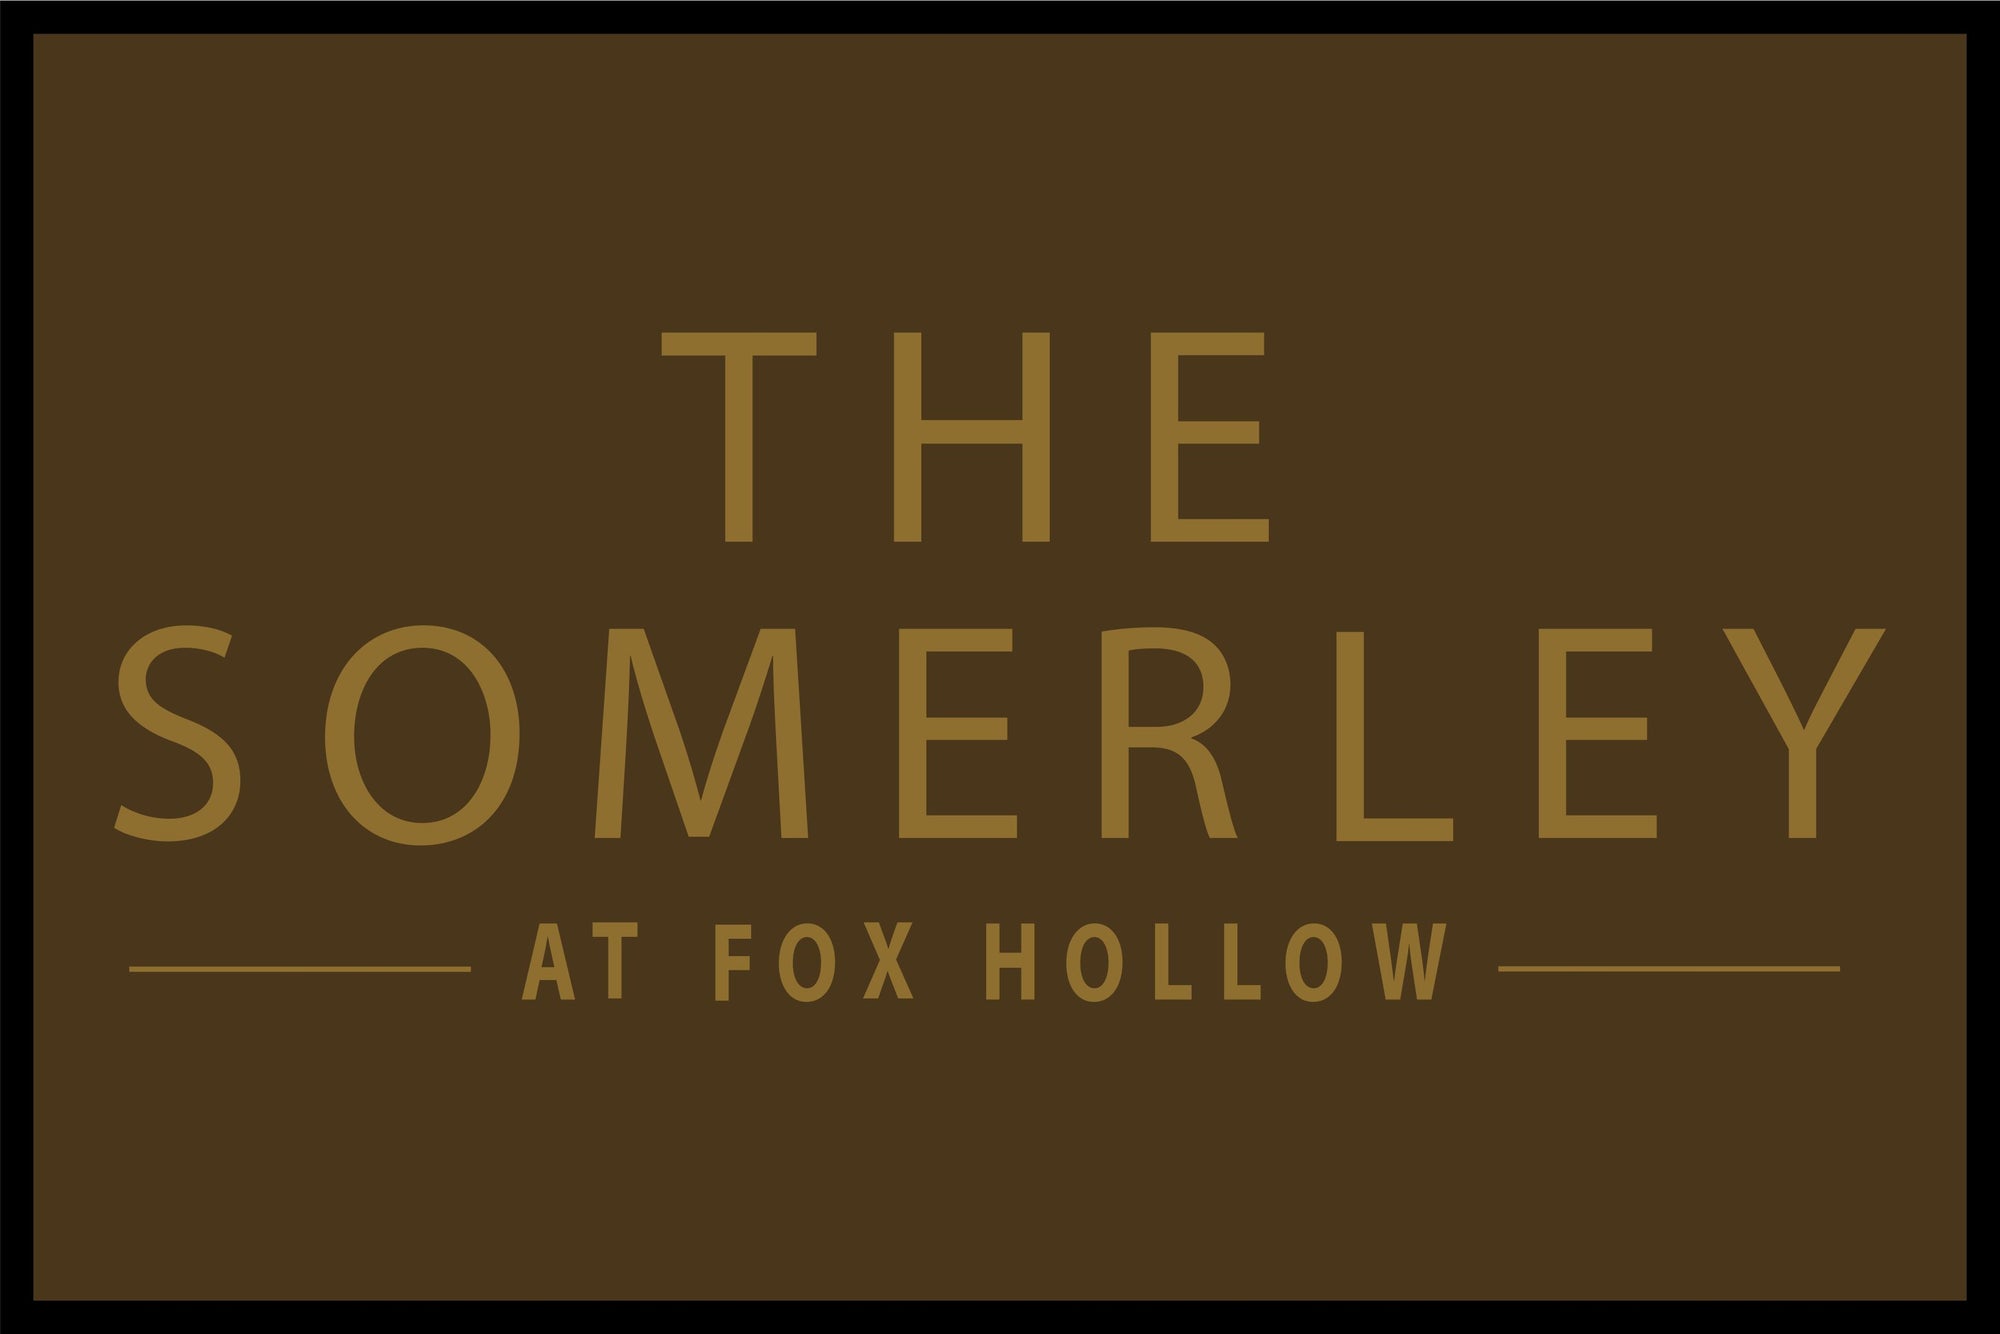 Somerley at Fox Hollow